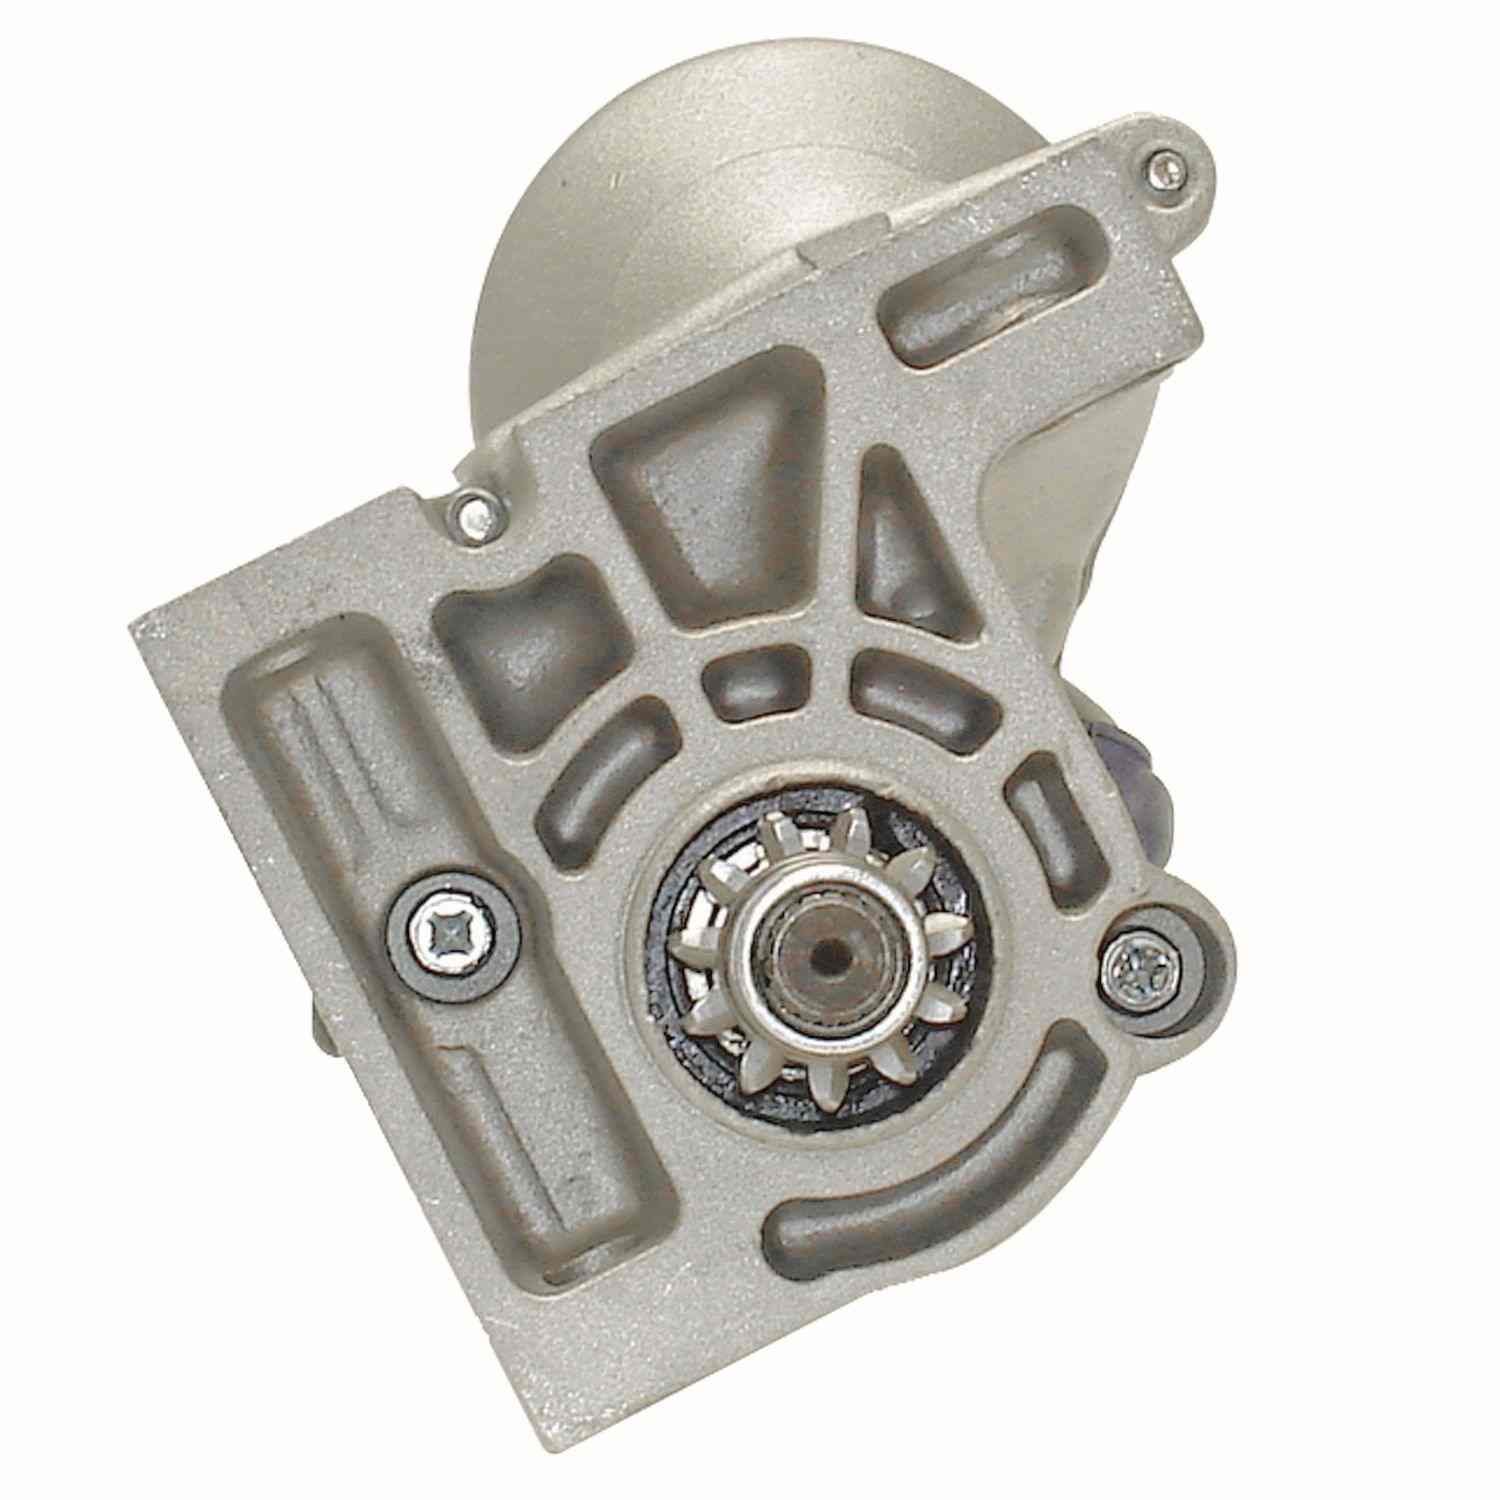 ACDELCO GOLD/PROFESSIONAL - Reman Starter Motor - DCC 336-1148